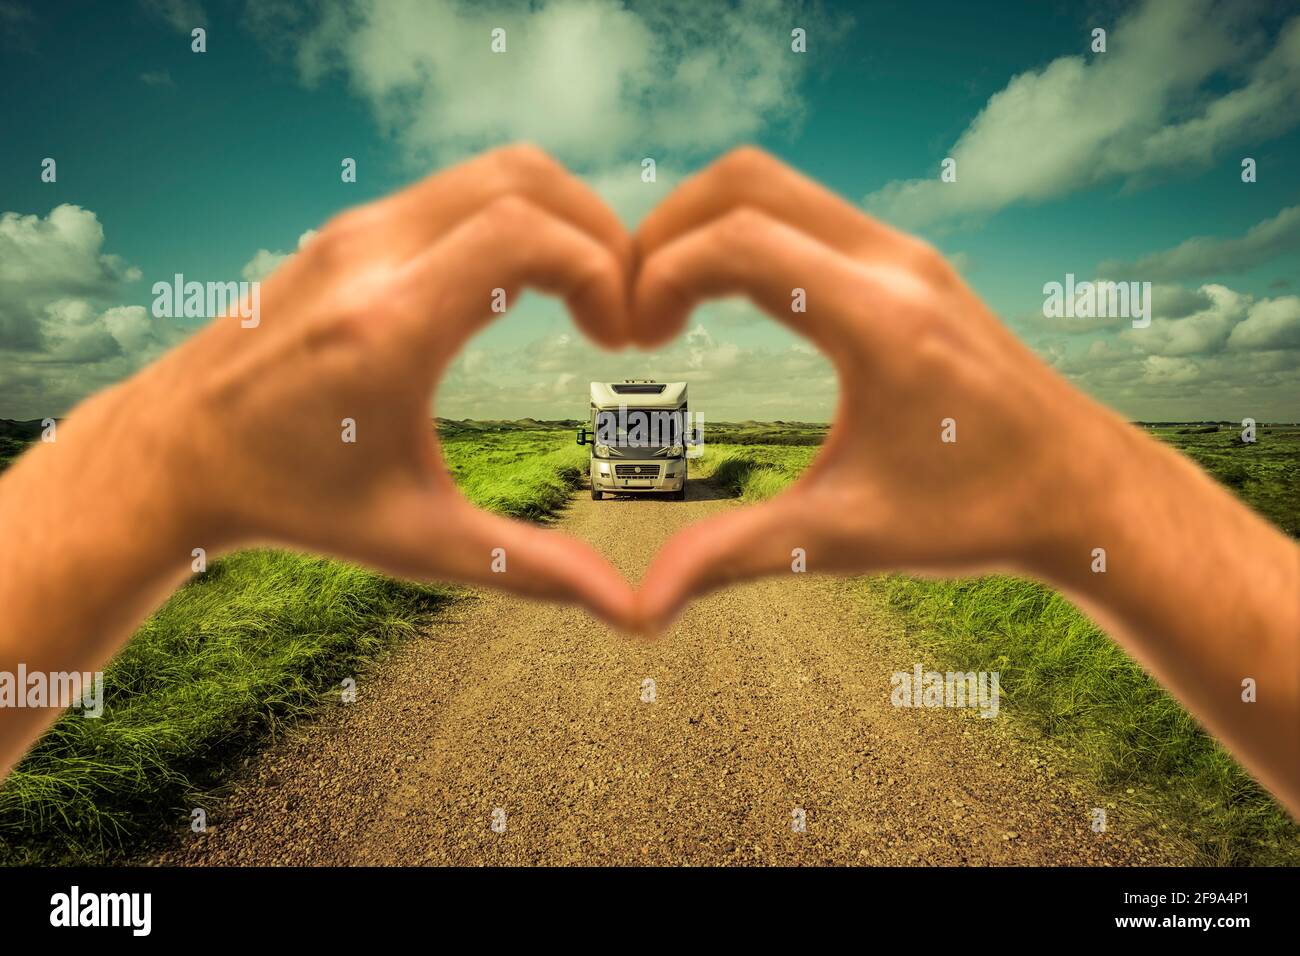 Motorhome on an off-road road seen through a heart hand Stock Photo